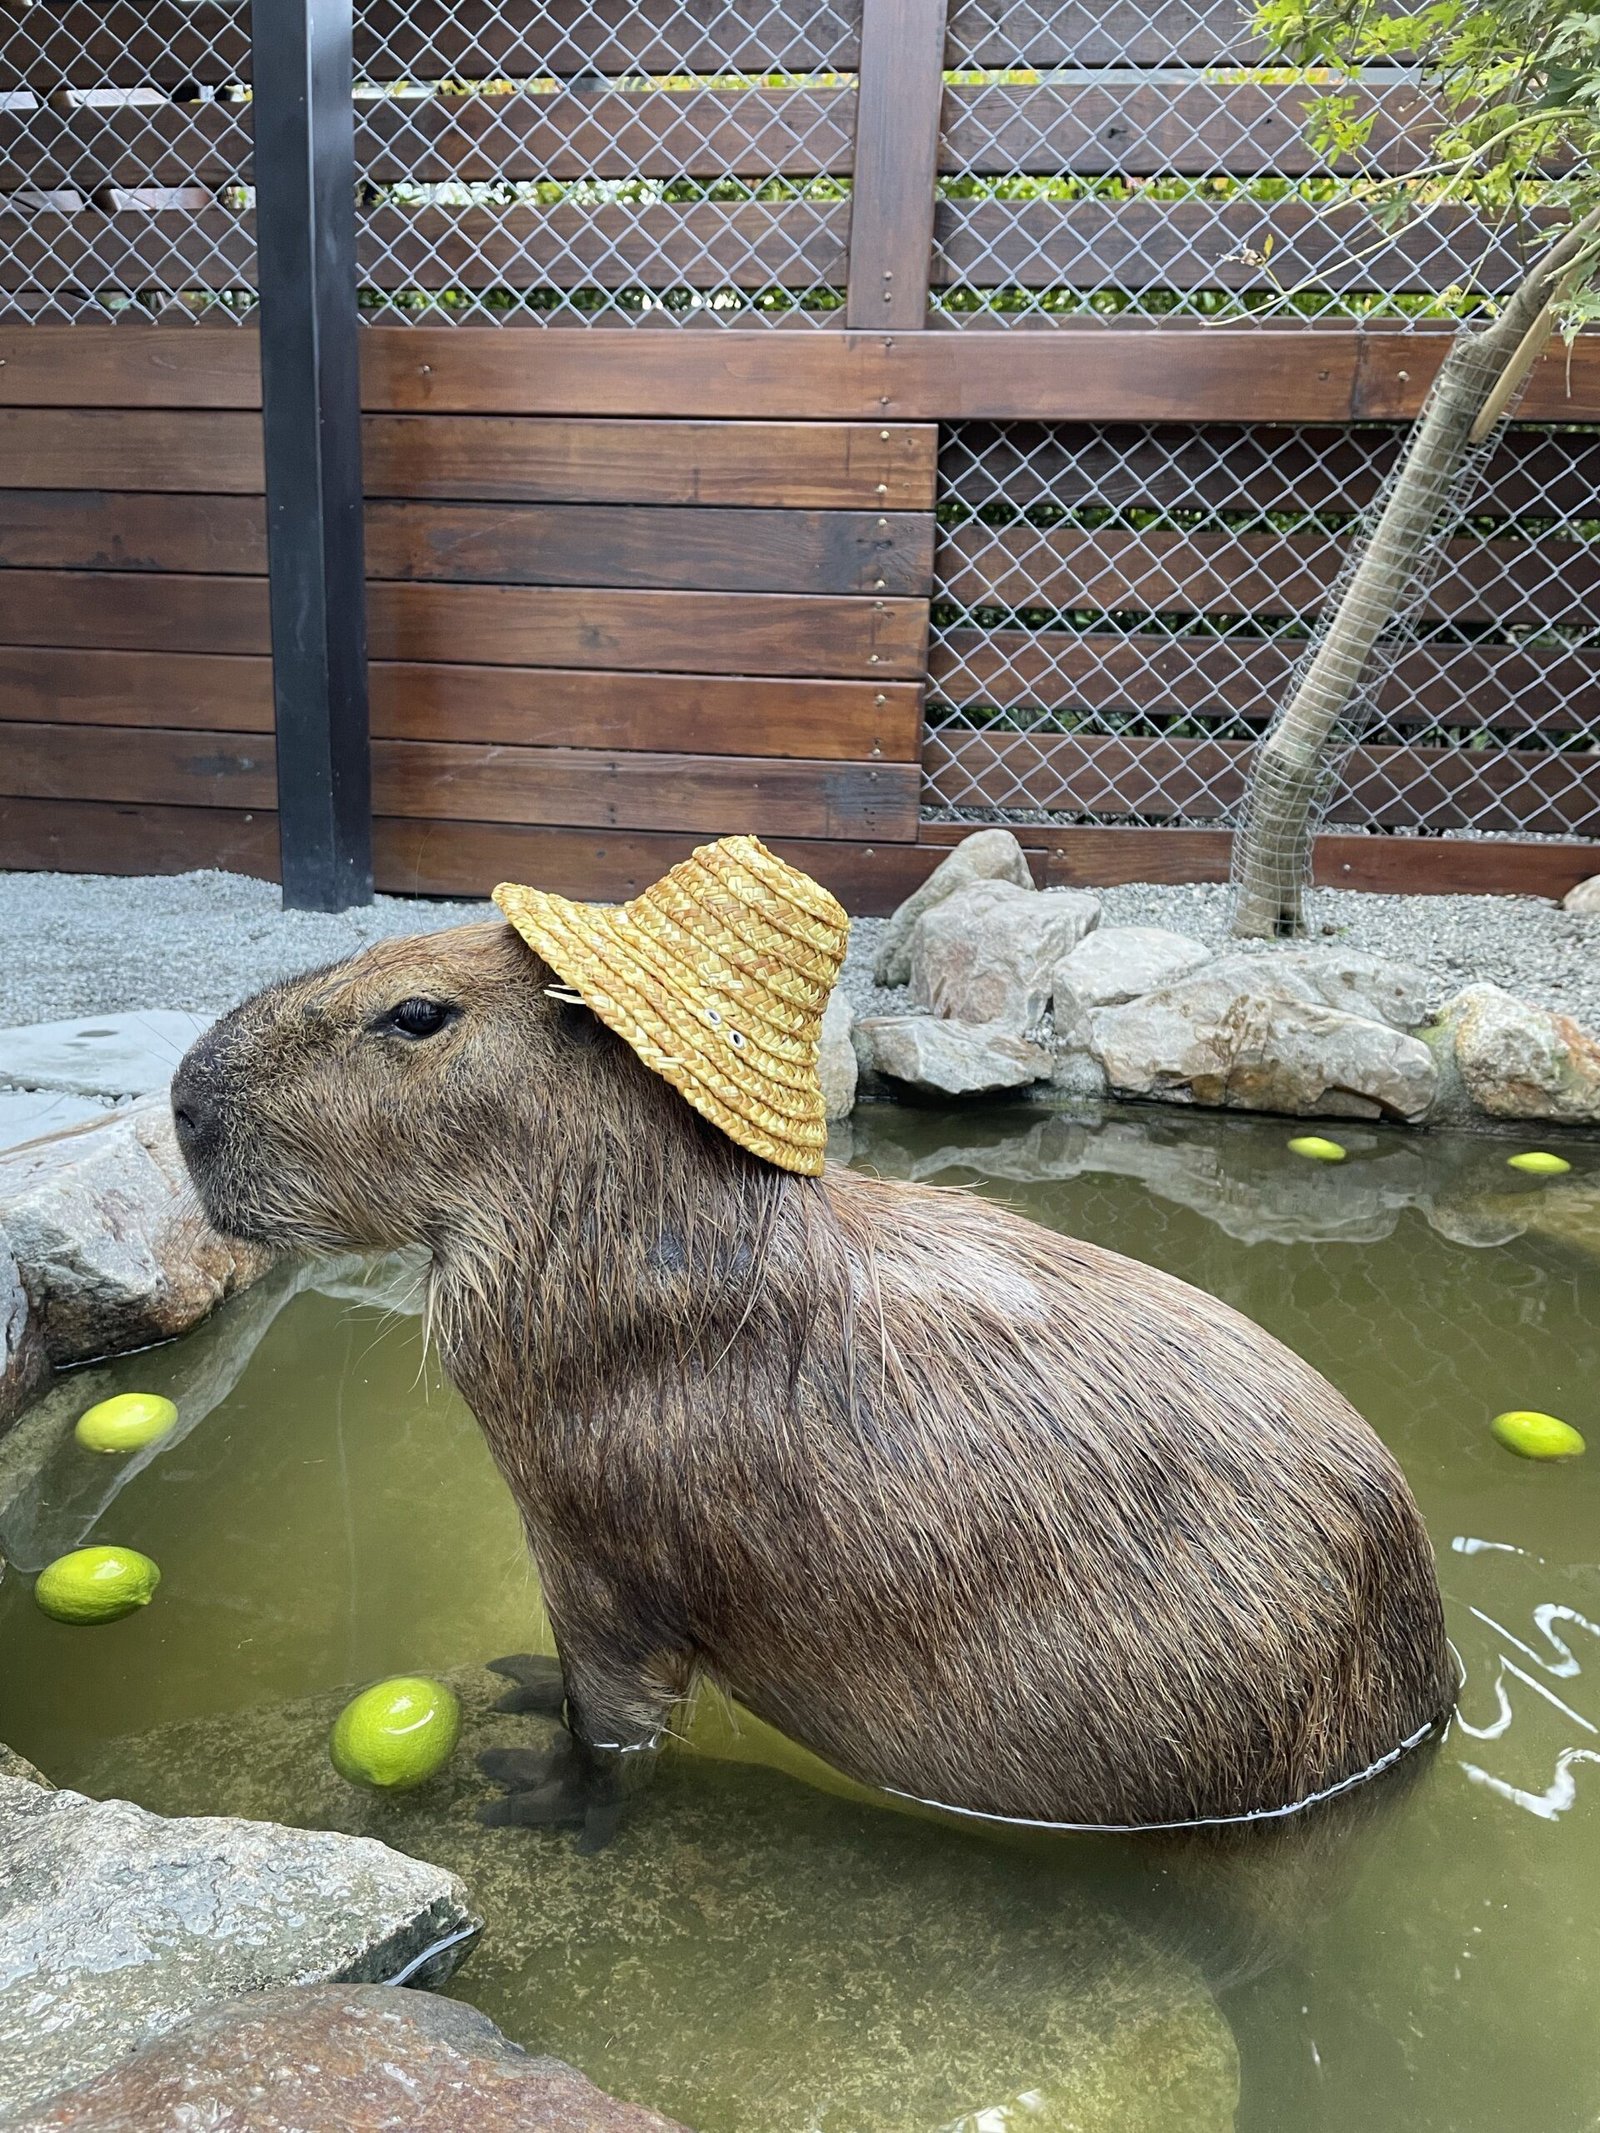 Visiting the Best Zoo in the UK with Capybaras